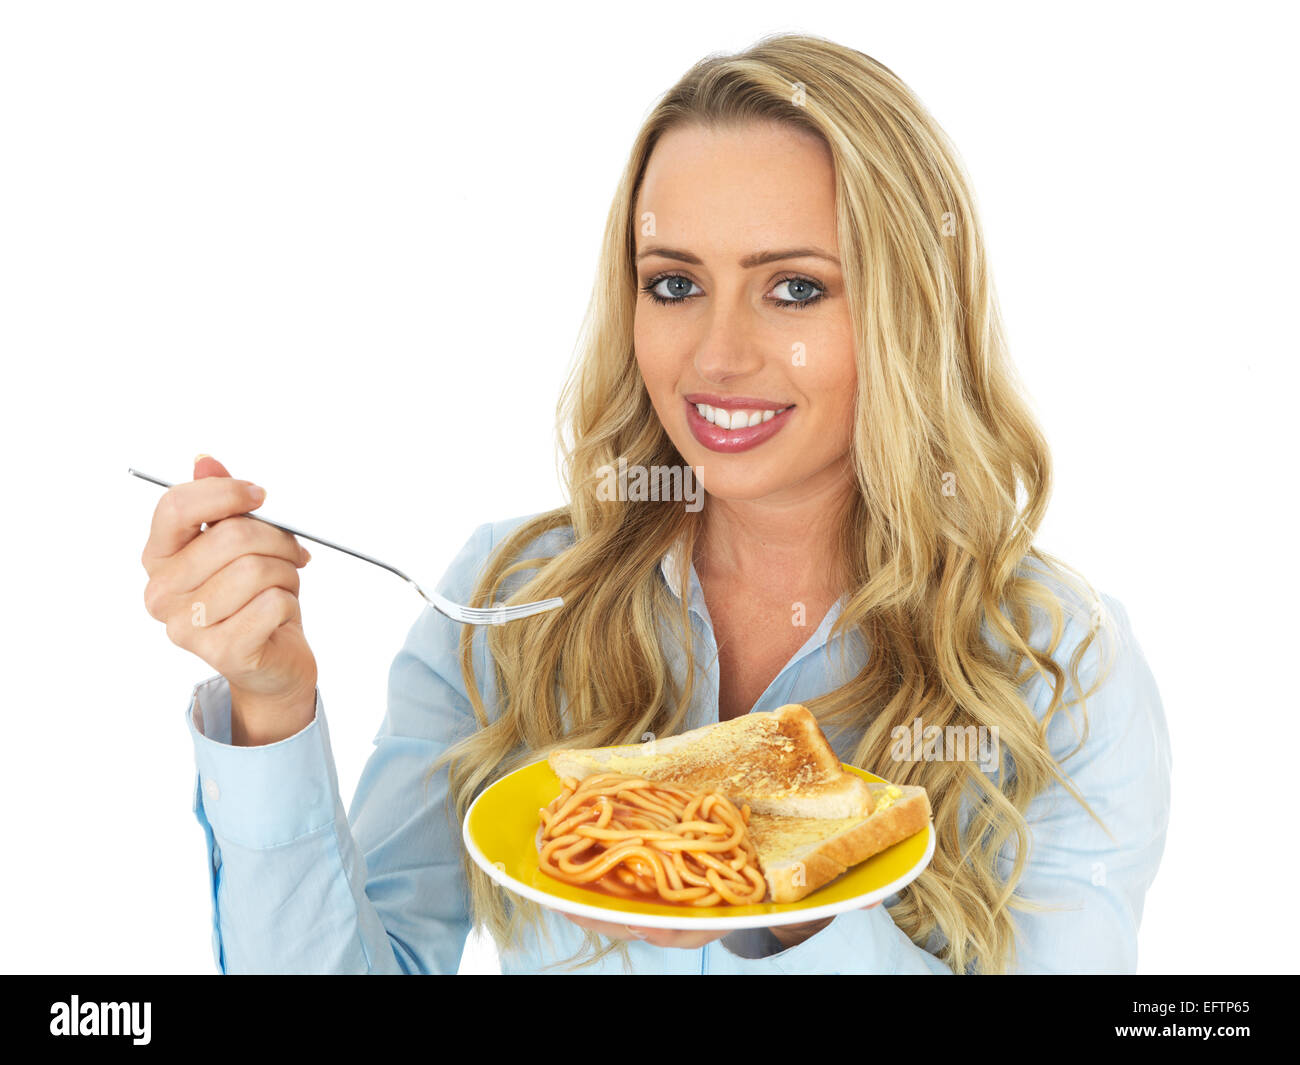 Attractive Young Woman Eating Spaghetti on Toast Stock Photo